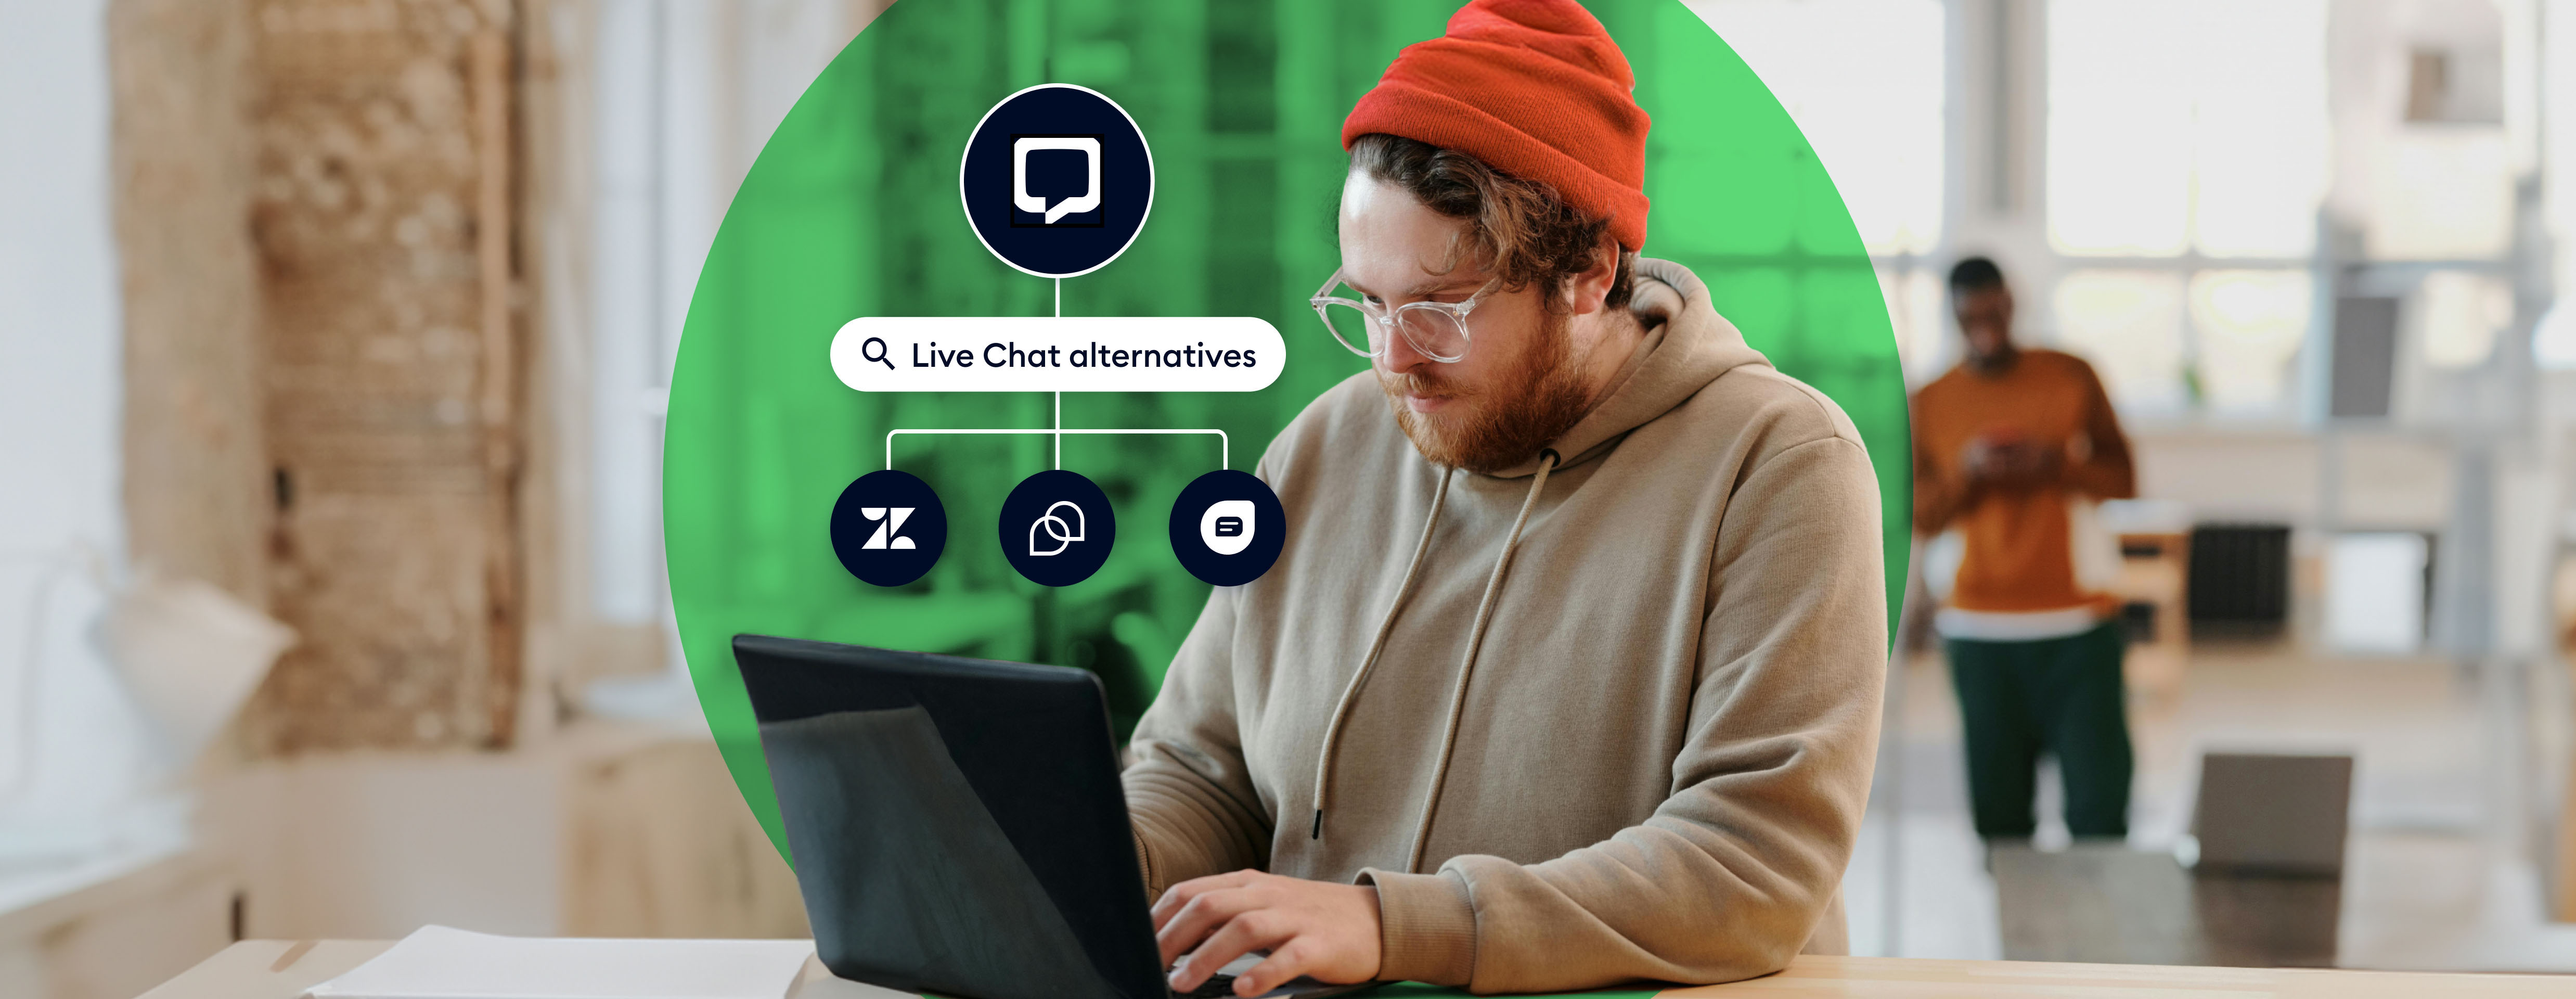 live chat alternatives cover image